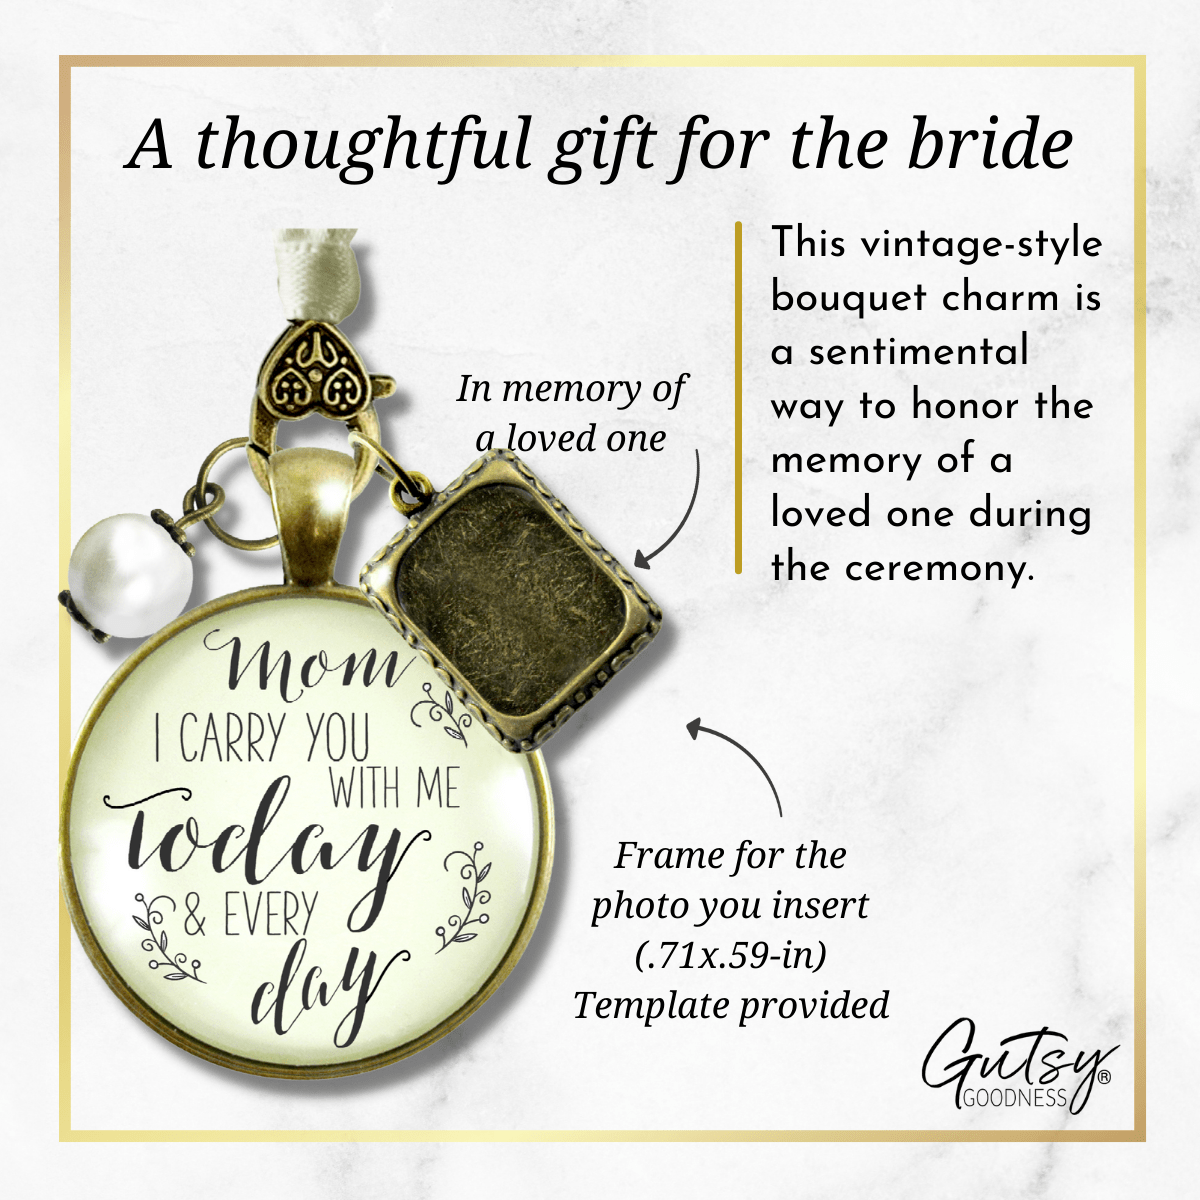 Bridal Bouquet Photo Charm Mom I Carry You Wedding Memorial Remember Frame Jewelry - Gutsy Goodness Handmade Jewelry Gifts